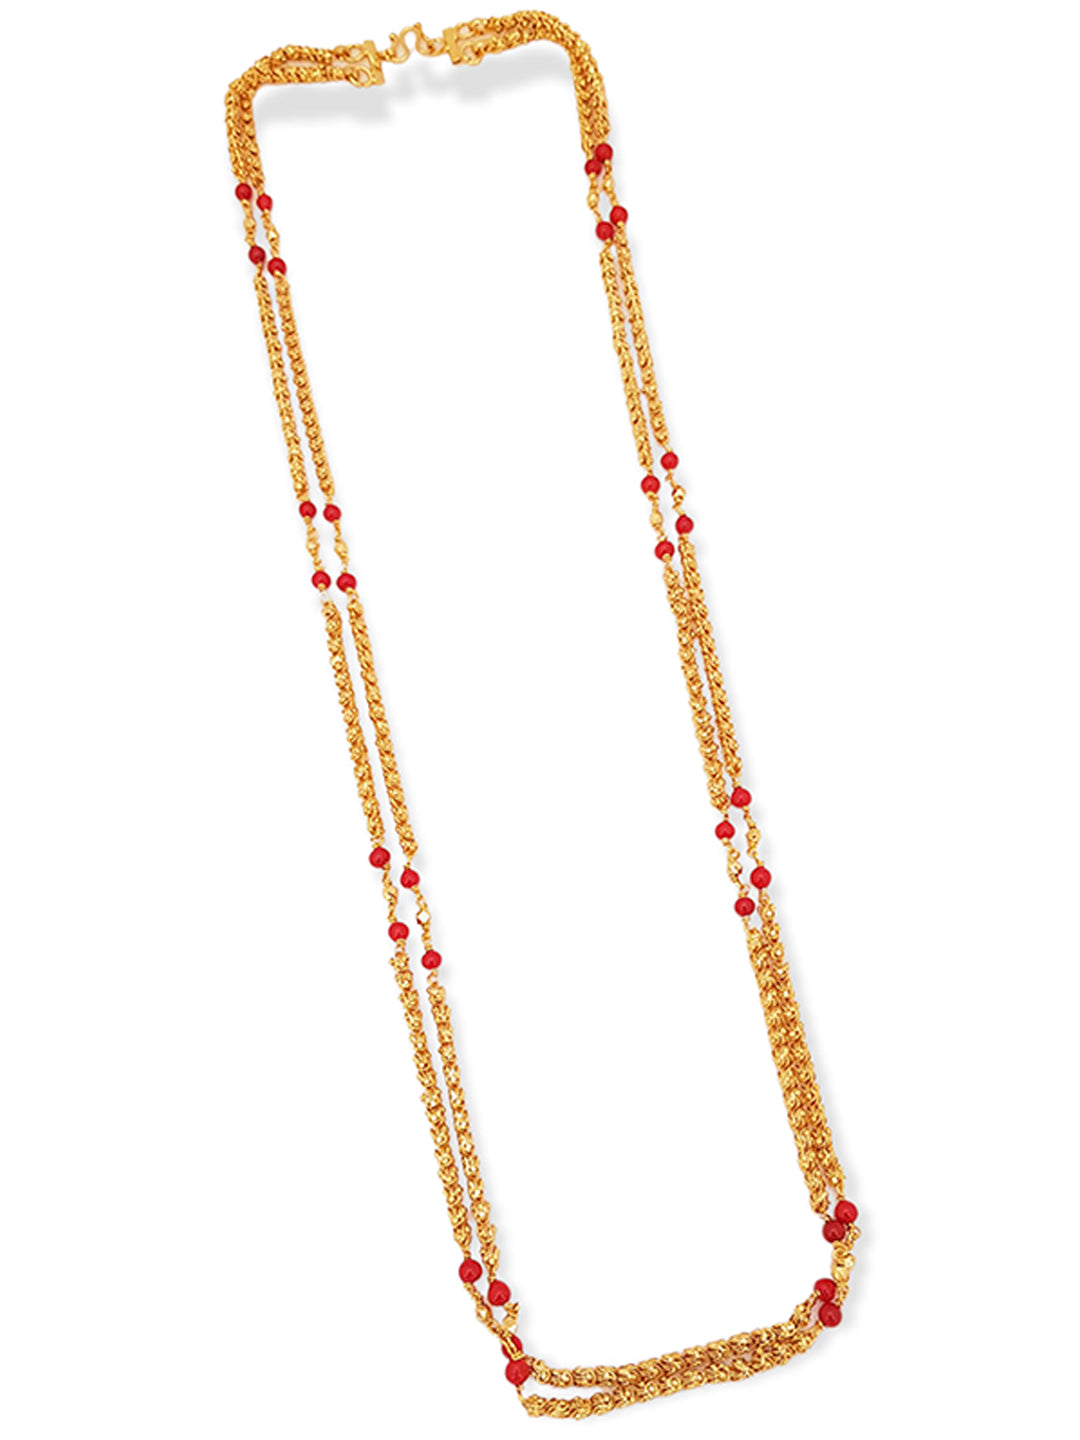 Premium Gold Finish Two Layers Real Coral / Pearl / Jade Chain 30 inches 6915N